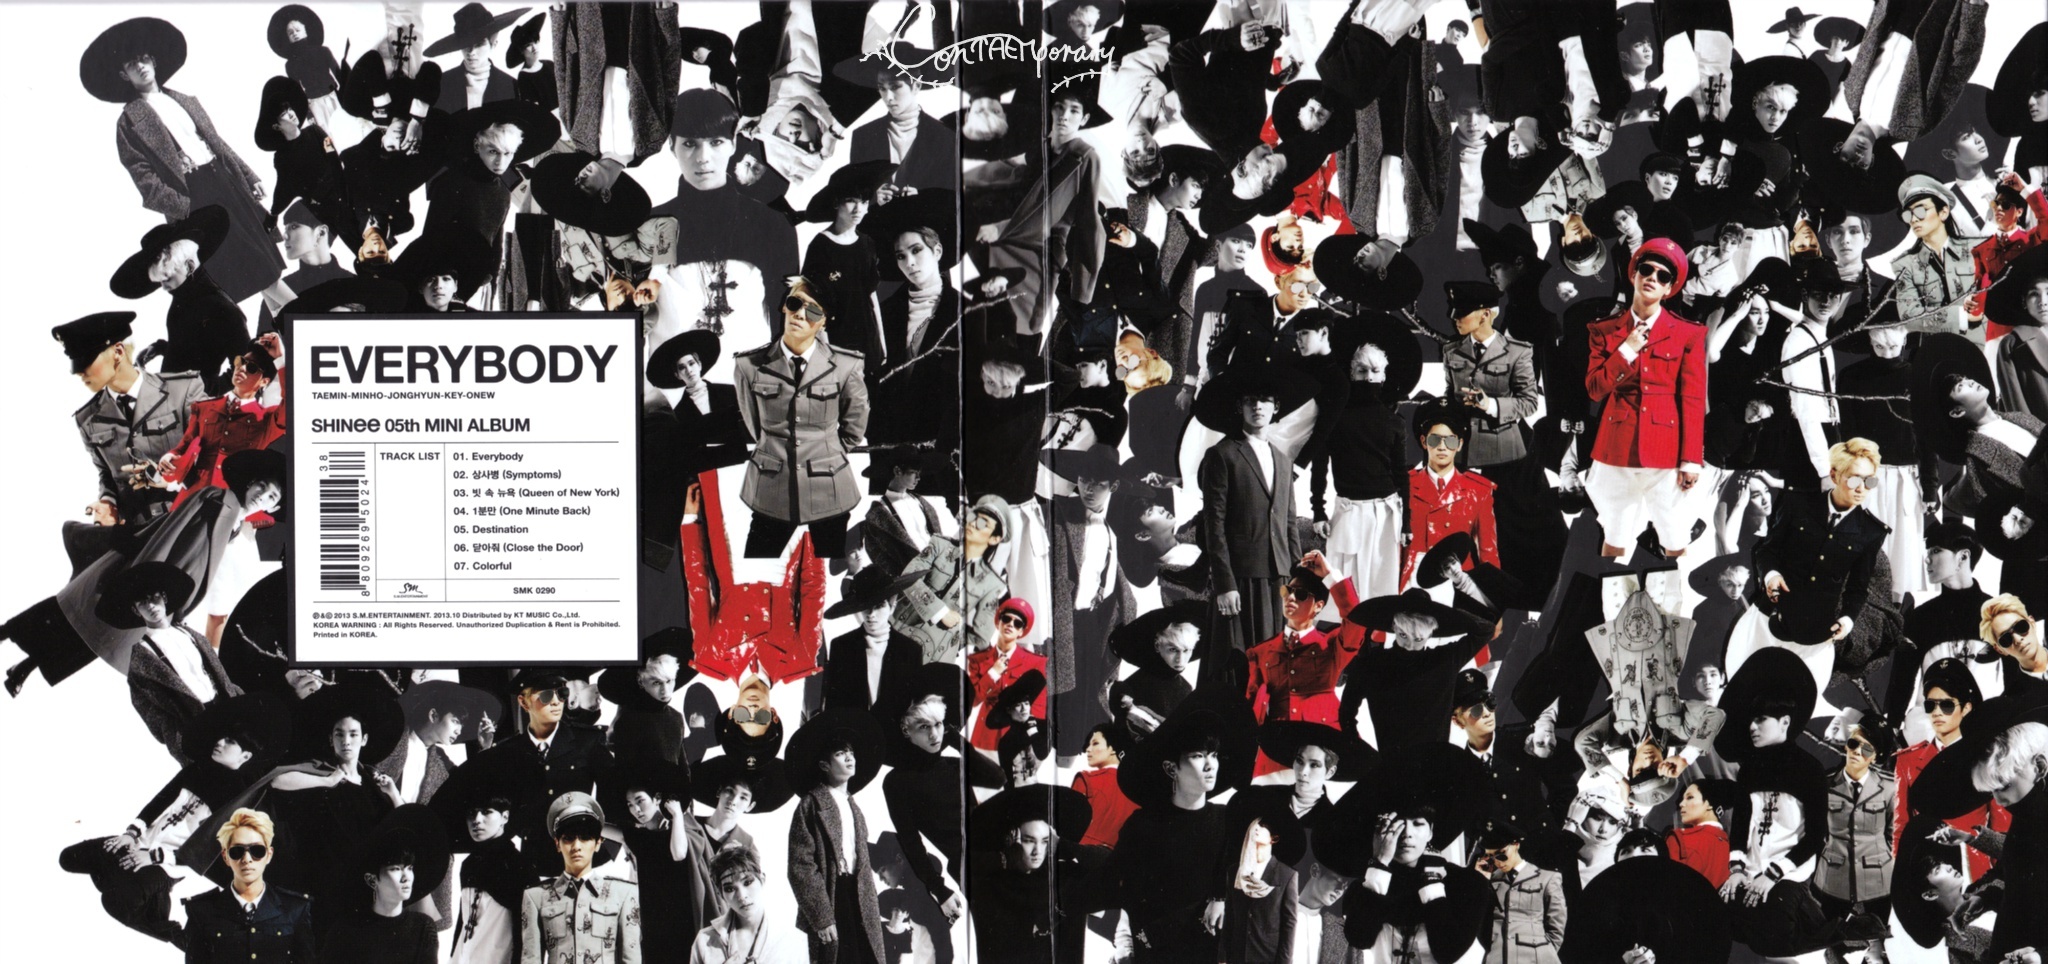 SHINee members posed for the everybody concept photo with the black hats